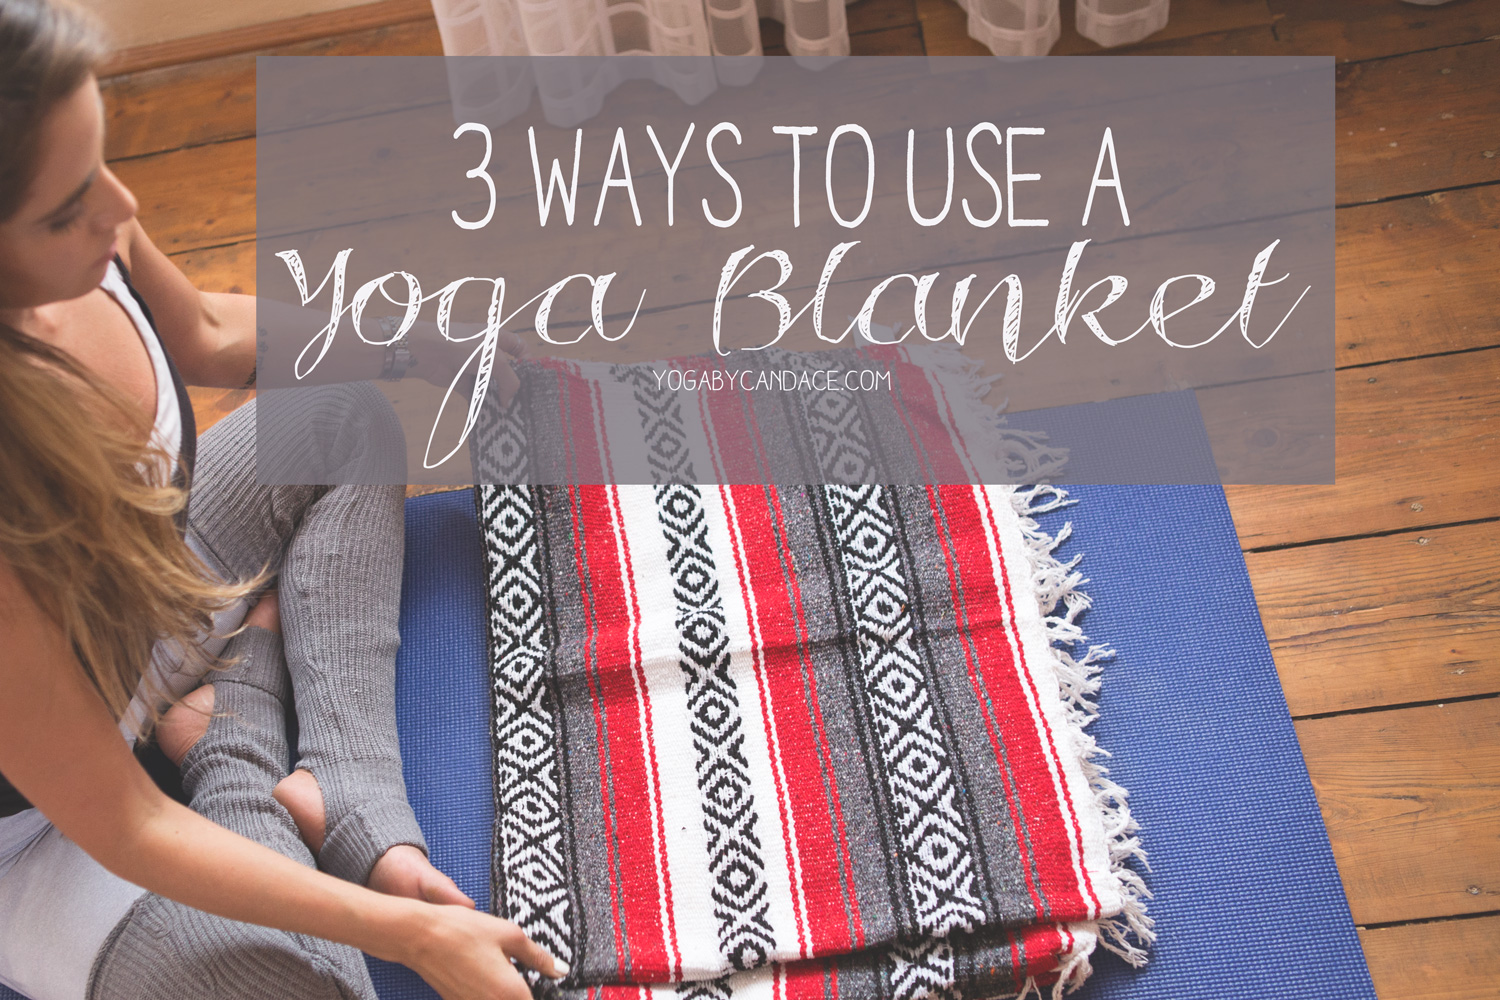 How to Use a Yoga Blanket — YOGABYCANDACE